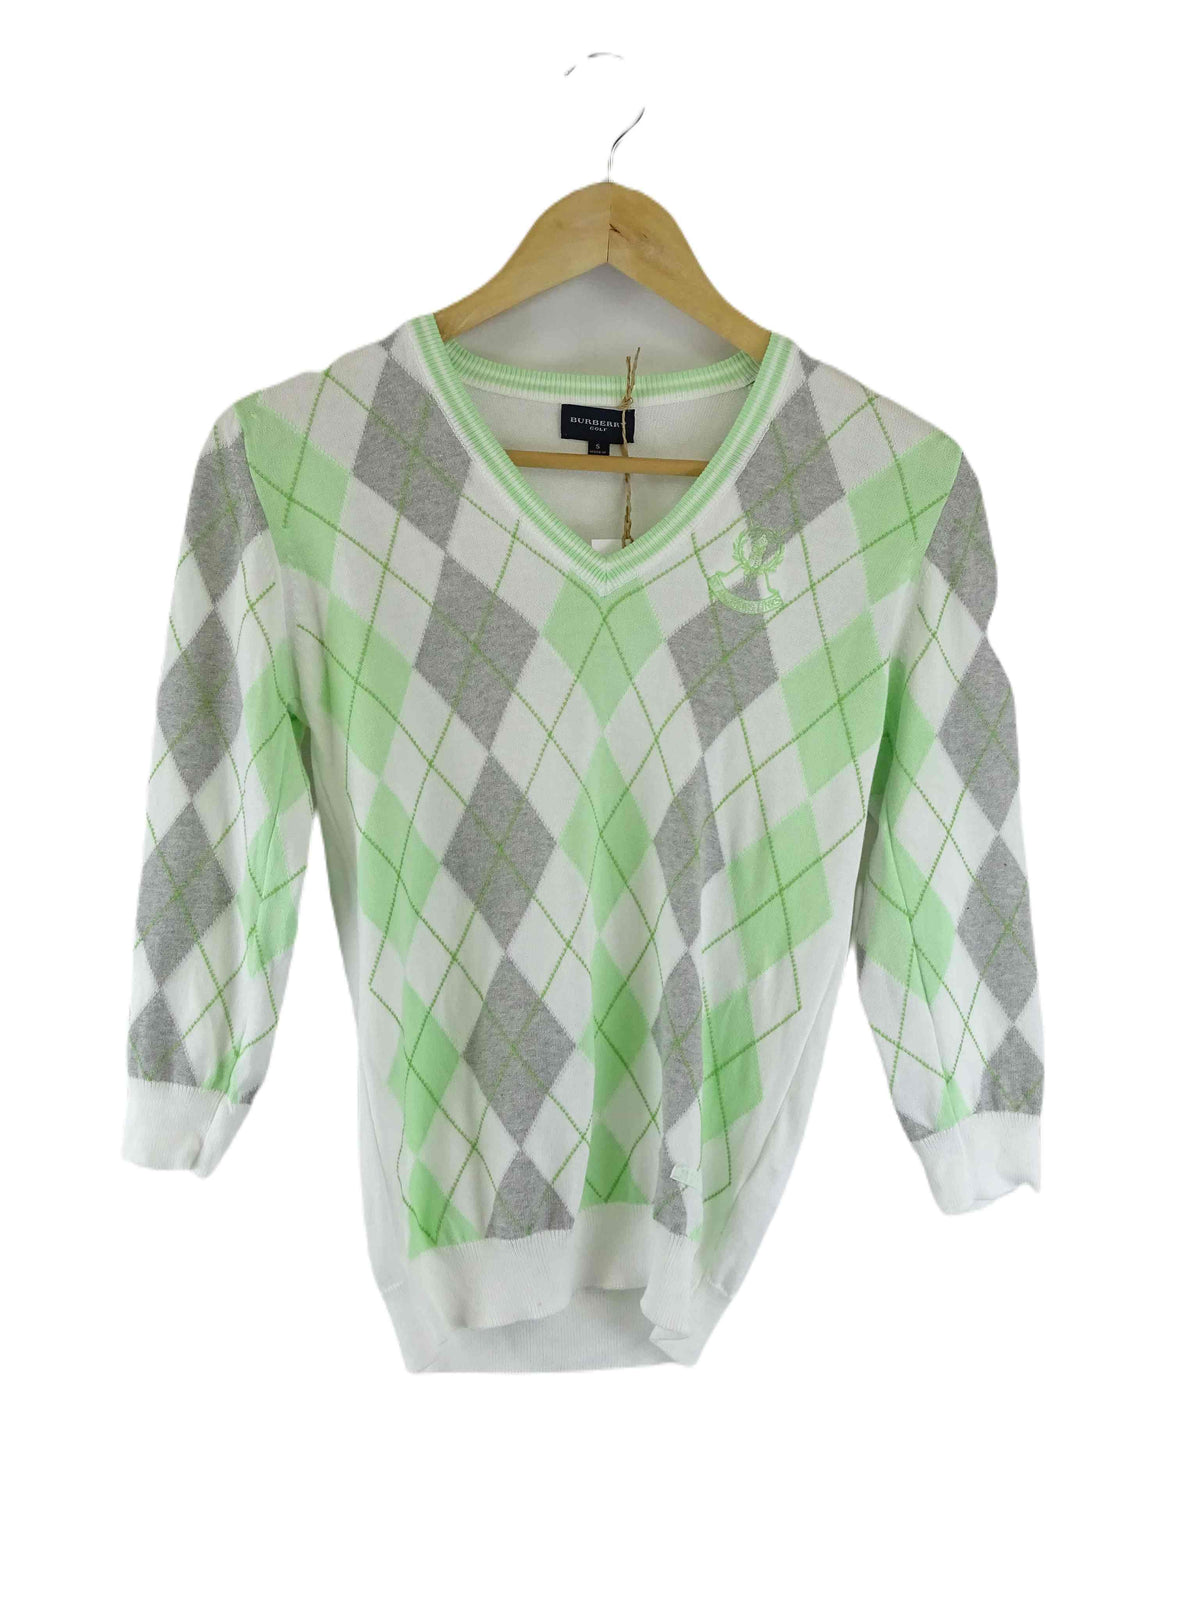 Burberry Golf Green And Grey Jumper S